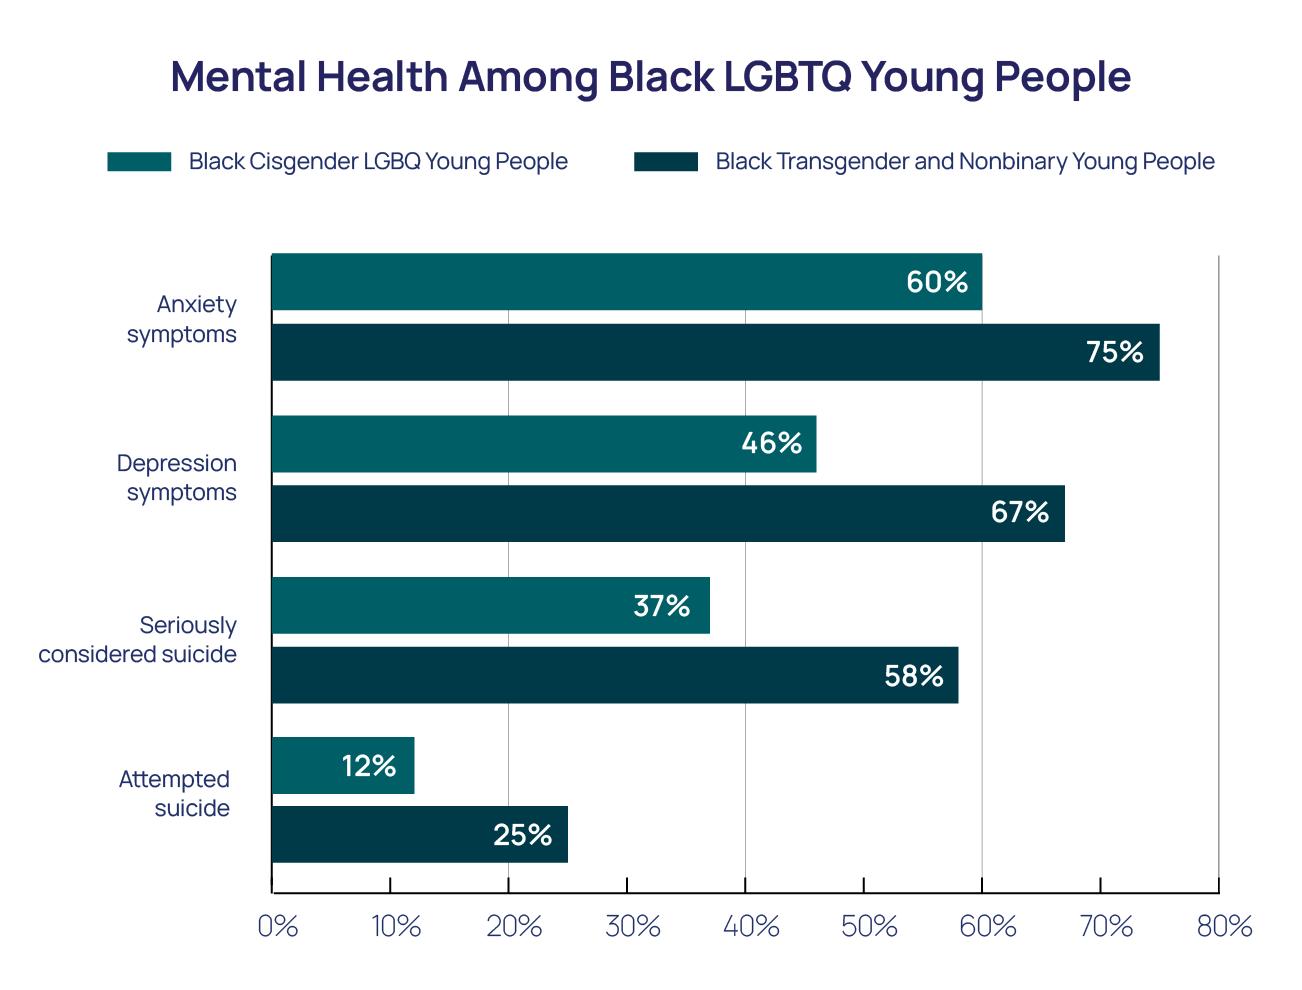 From the Trevor Project; statistics on Black trans and nonbinary rates of suicidal ideation and attempts. Text reads in part: (57%) Black LGBTQ young people identified as transgender or nonbinary, 11% of whom were transgender. Black transgender and nonbinary young people reported higher rates of all indicators of poor mental health compared to their Black cisgender LGBQ peers. This includes reporting more than double the rate of suicide attempts in the past year (25%) compared to Black cisgender LGBQ young people (12%). Among Black transgender and nonbinary young people, those who were assigned female at birth reported higher rates of both seriously considering suicide in the past year (60%) and attempting suicide in the past year (26%) compared to Black transgender and nonbinary young people assigned male at birth (43% and 18%, respectively), similar to overall patterns among transgender and nonbinary young people.(57%) Black LGBTQ young people identified as transgender or nonbinary, 11% of whom were transgender. Black transgender and nonbinary young people reported higher rates of all indicators of poor mental health compared to their Black cisgender LGBQ peers. This includes reporting more than double the rate of suicide attempts in the past year (25%) compared to Black cisgender LGBQ young people (12%). Among Black transgender and nonbinary young people, those who were assigned female at birth reported higher rates of both seriously considering suicide in the past year (60%) and attempting suicide in the past year (26%) compared to Black transgender and nonbinary young people assigned male at birth (43% and 18%, respectively), similar to overall patterns among transgender and nonbinary young people. (57%) Black LGBTQ young people identified as transgender or nonbinary, 11% of whom were transgender. Black transgender and nonbinary young people reported higher rates of all indicators of poor mental health compared to their Black cisgender LGBQ peers. This includes reporting more than double the rate of suicide attempts in the past year (25%) compared to Black cisgender LGBQ young people (12%). Among Black transgender and nonbinary young people, those who were assigned female at birth reported higher rates of both seriously considering suicide in the past year (60%) and attempting suicide in the past year (26%) compared to Black transgender and nonbinary young people assigned male at birth (43% and 18%, respectively), similar to overall patterns among transgender and nonbinary young people.